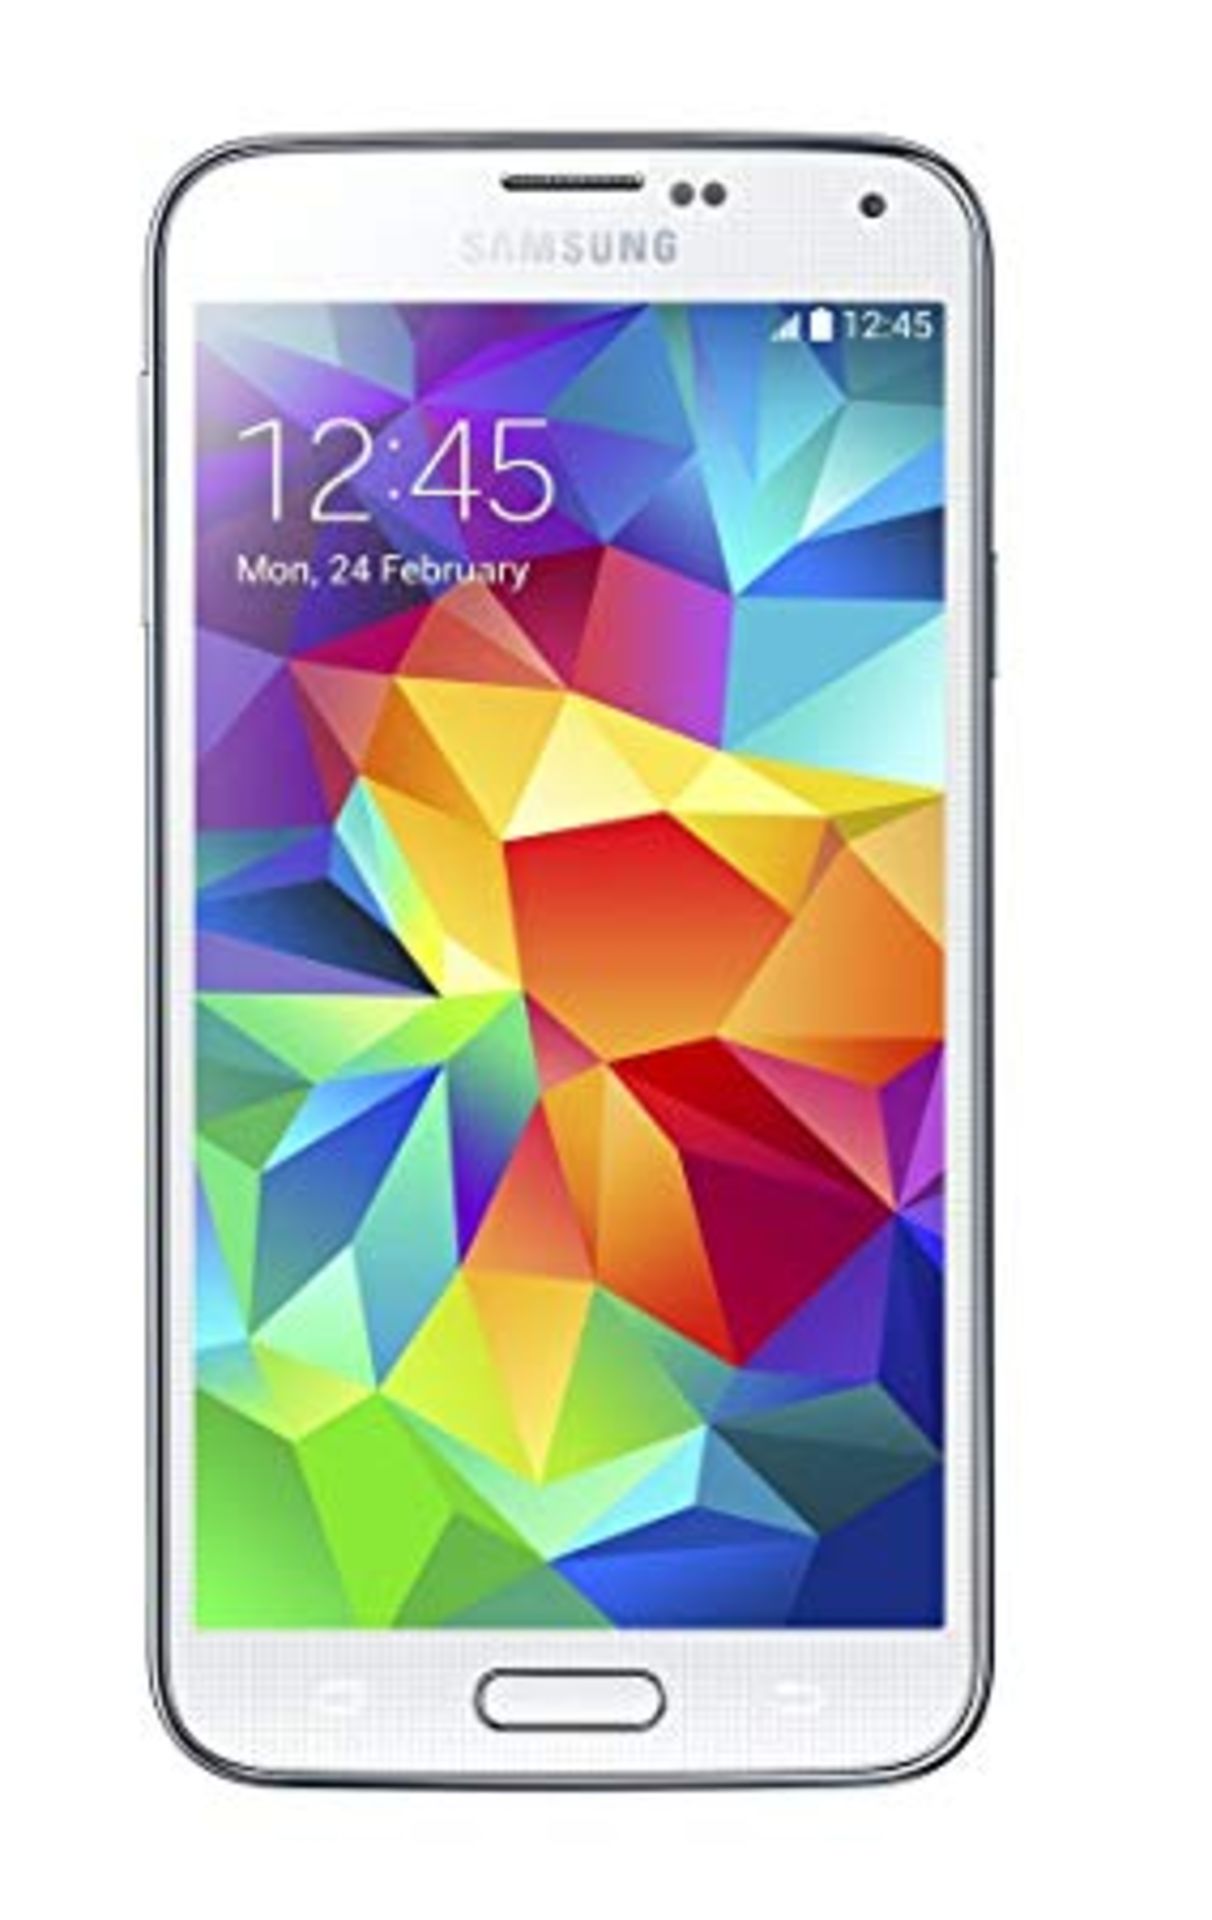 Grade A Samsung S5 ( G900F) Colours May Vary Item available from approx 27th February